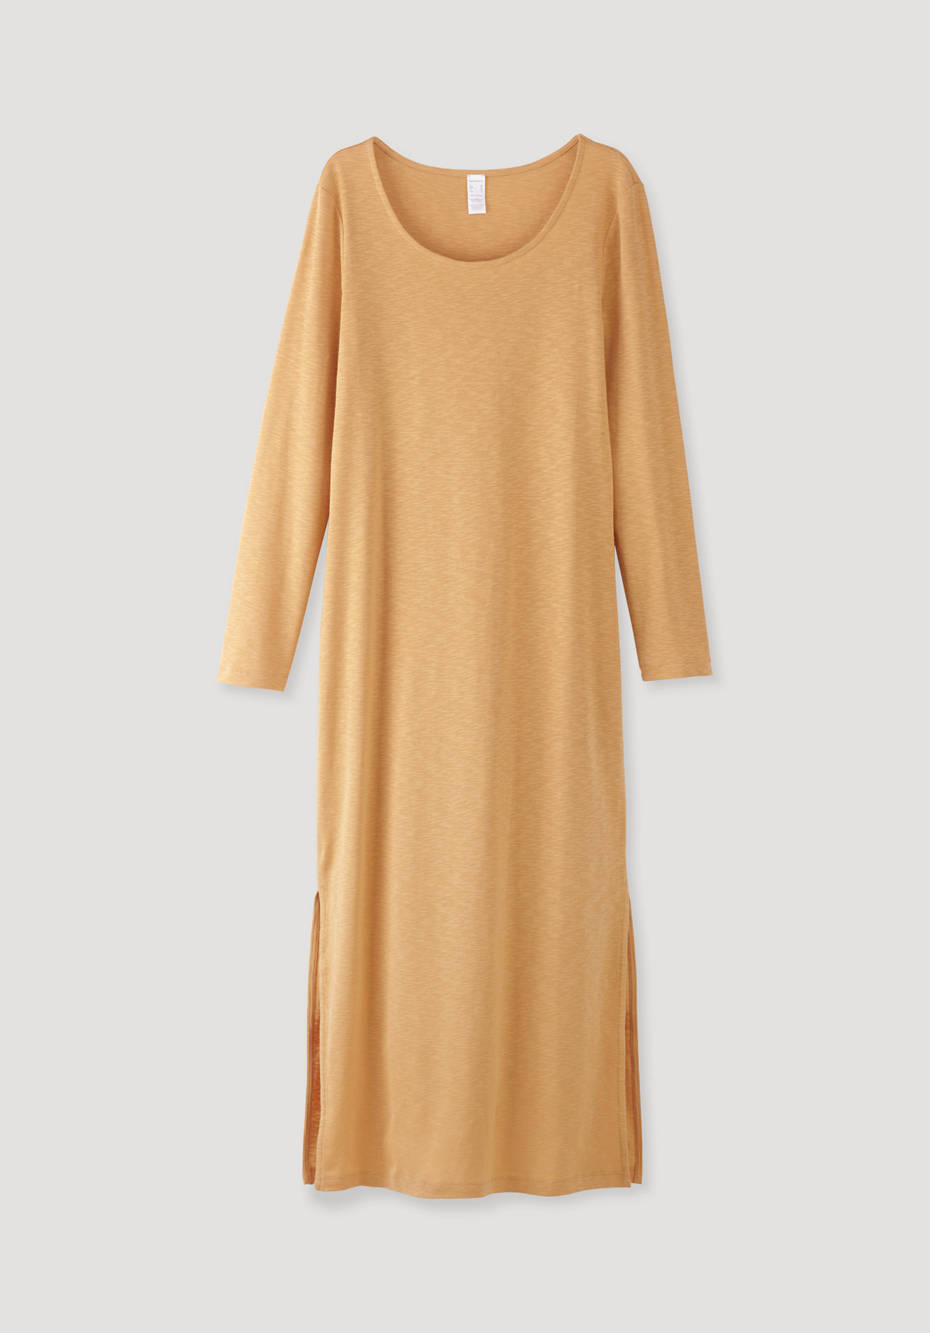 Nightgown made from soft organic cotton